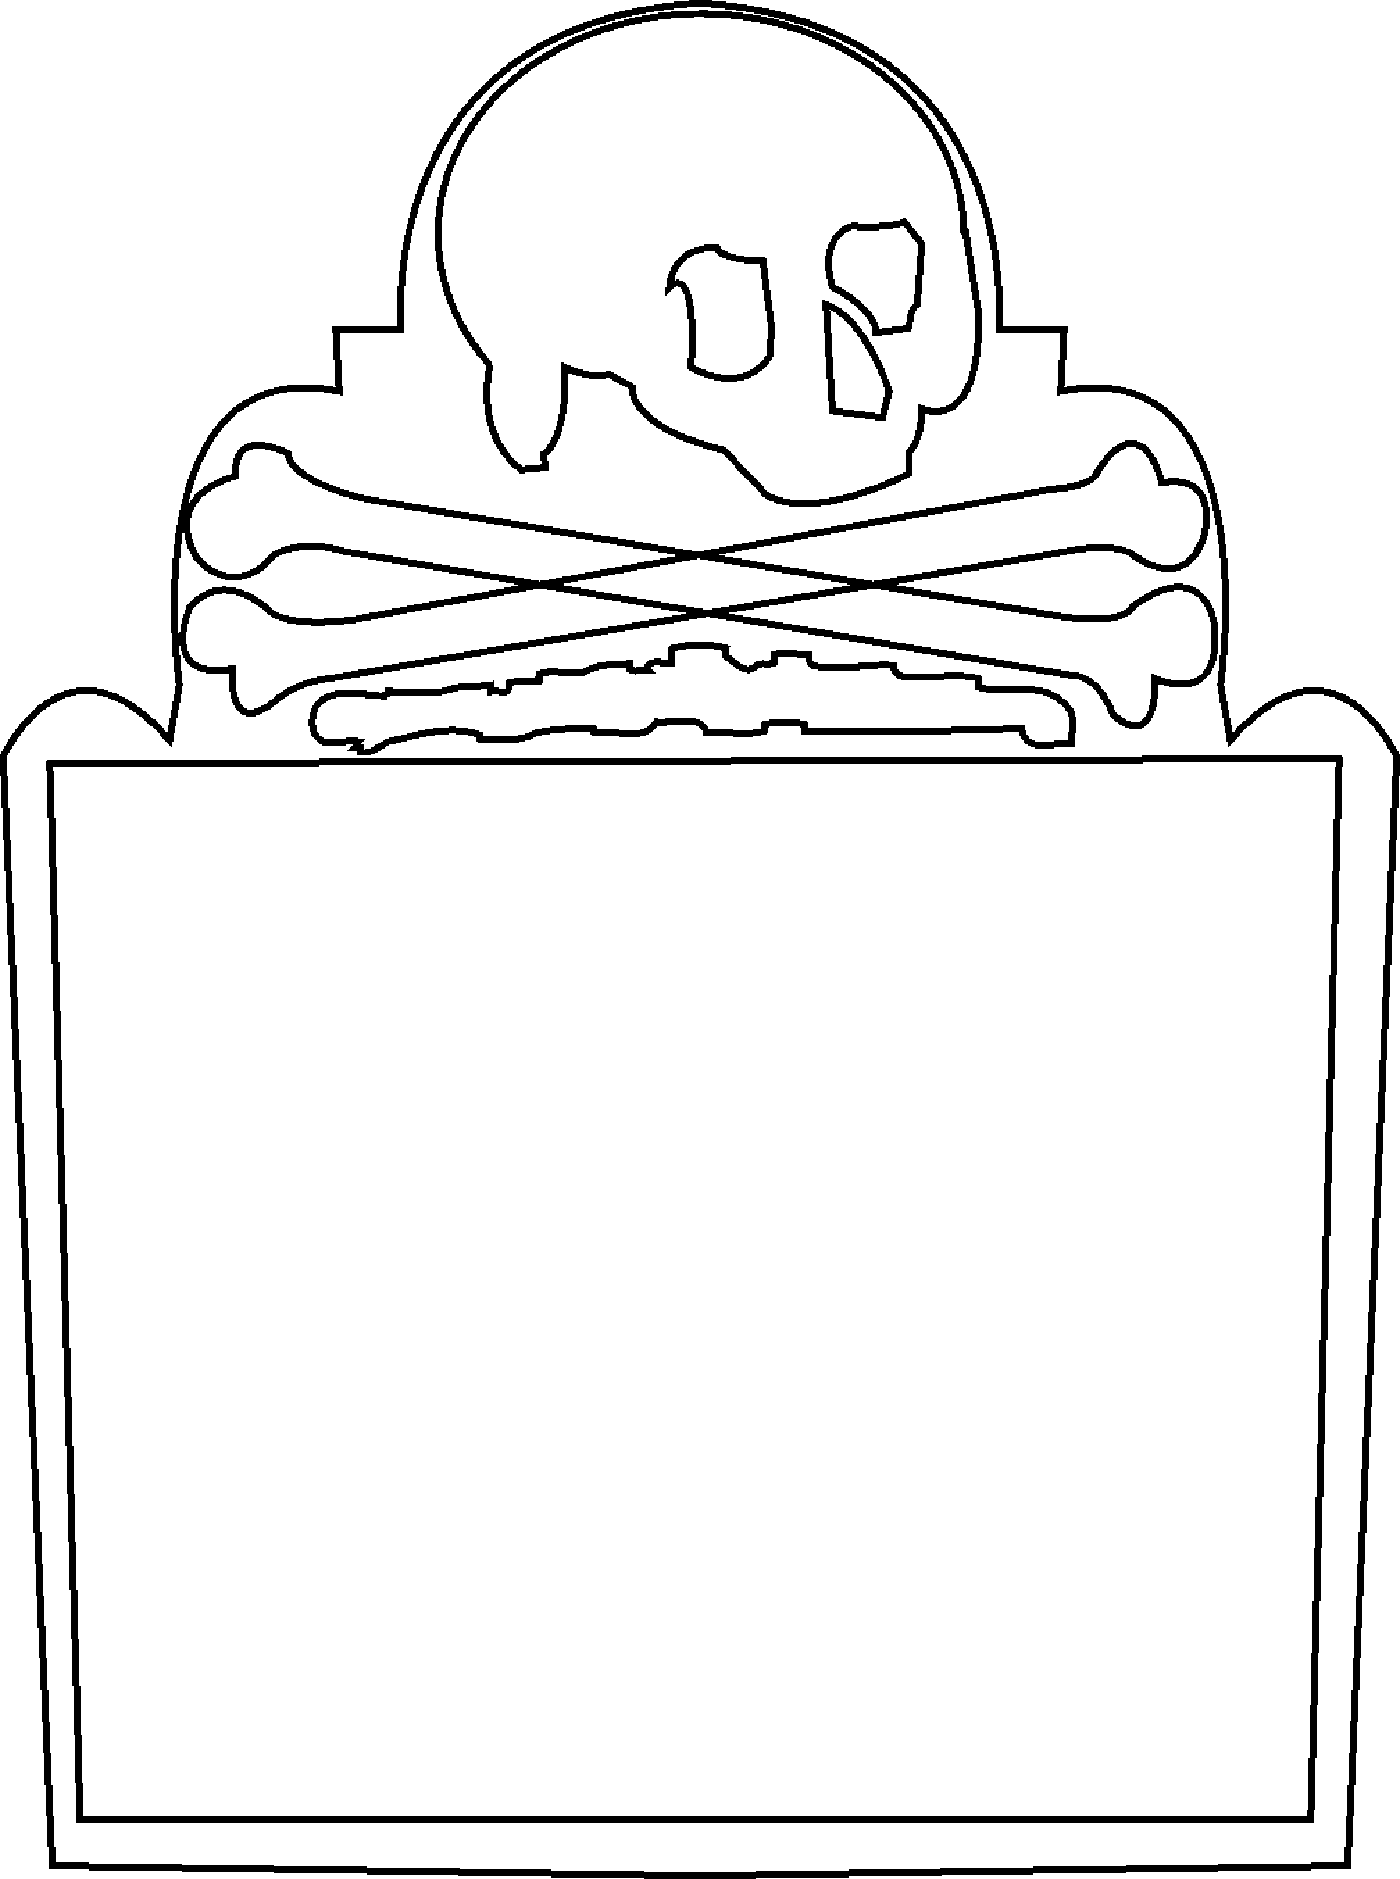 Images For > Gravestone Drawing